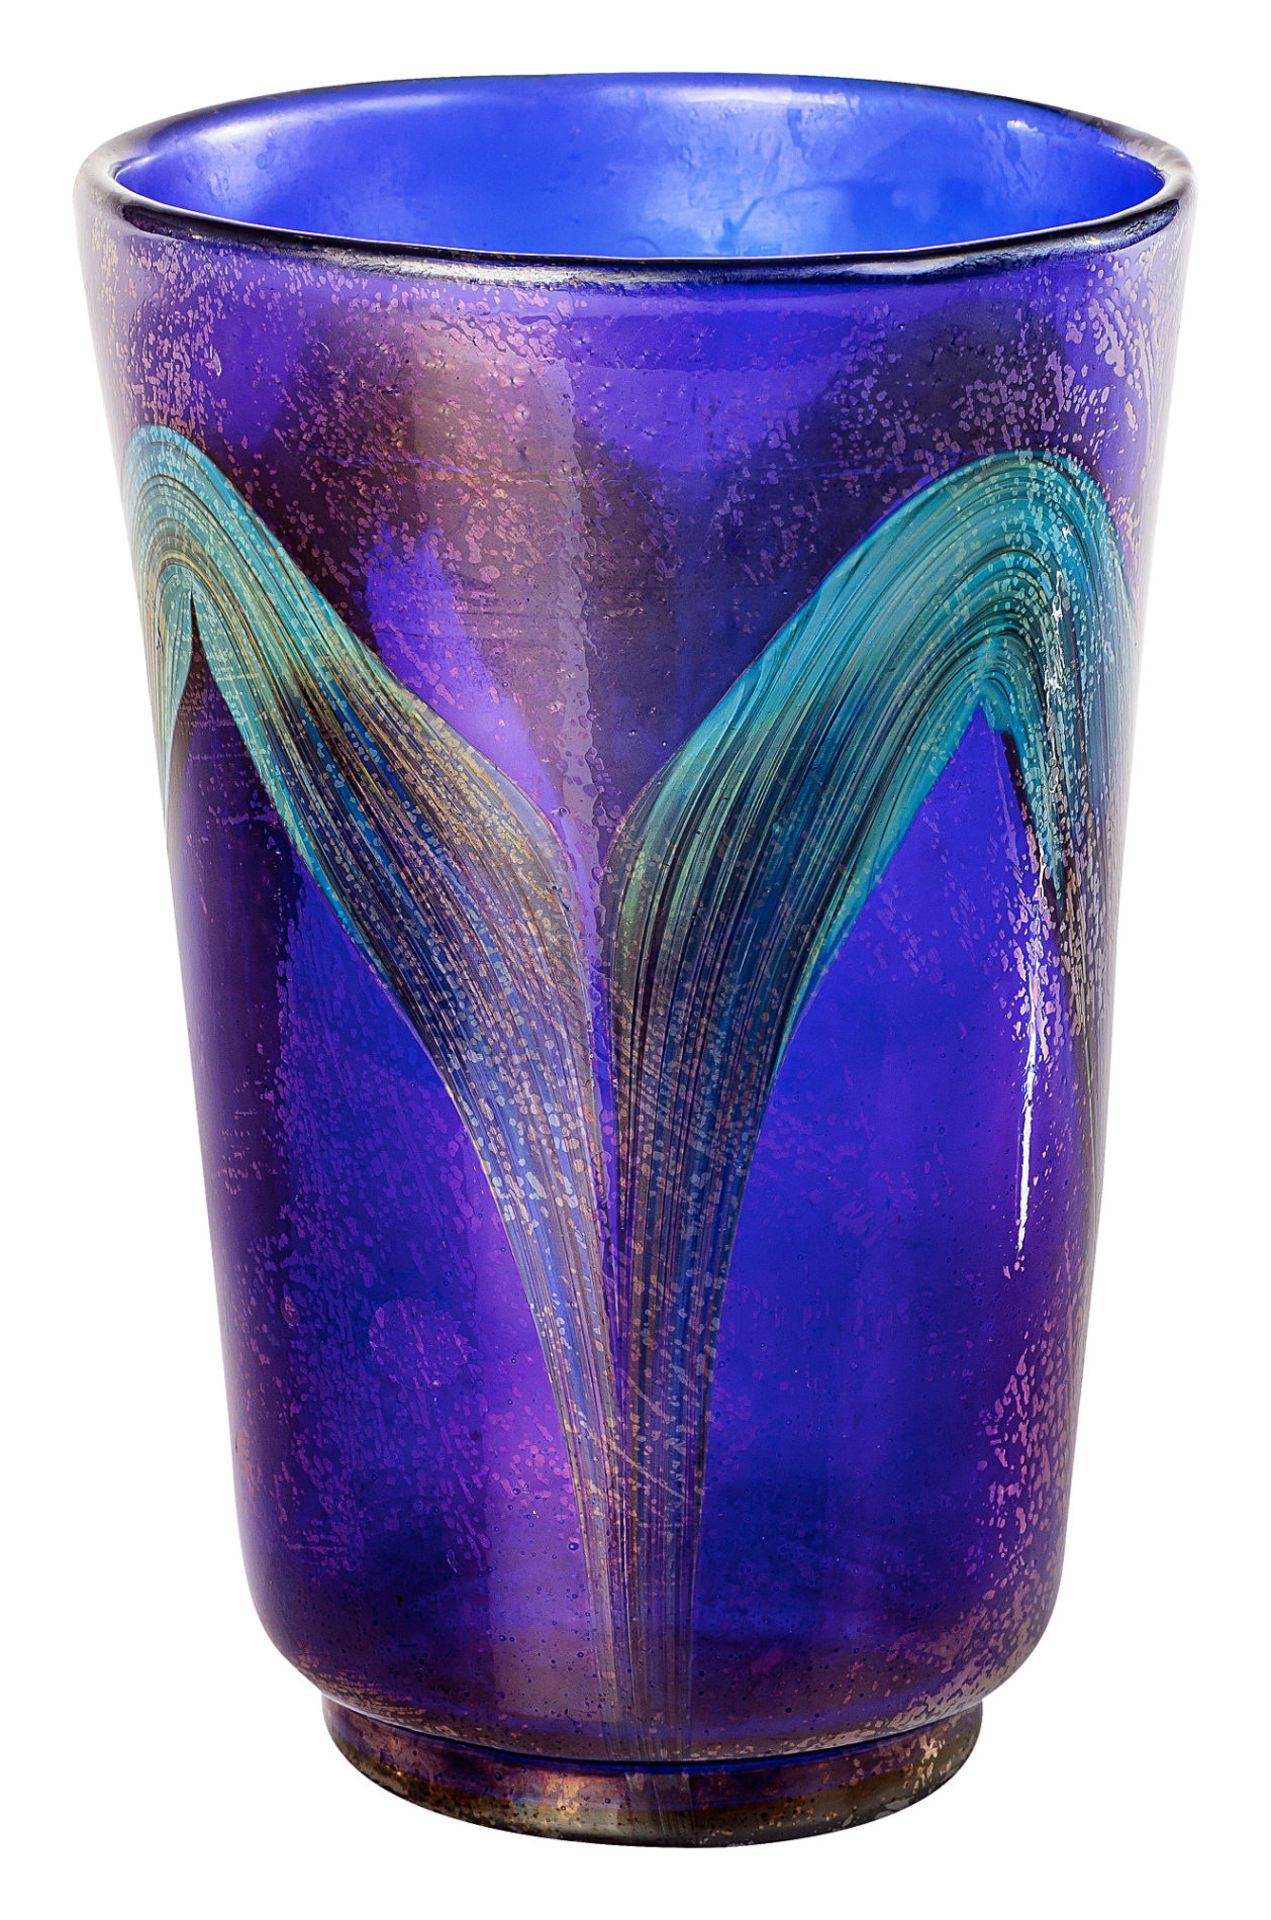 Conical vase with iridescent decor - Image 2 of 2